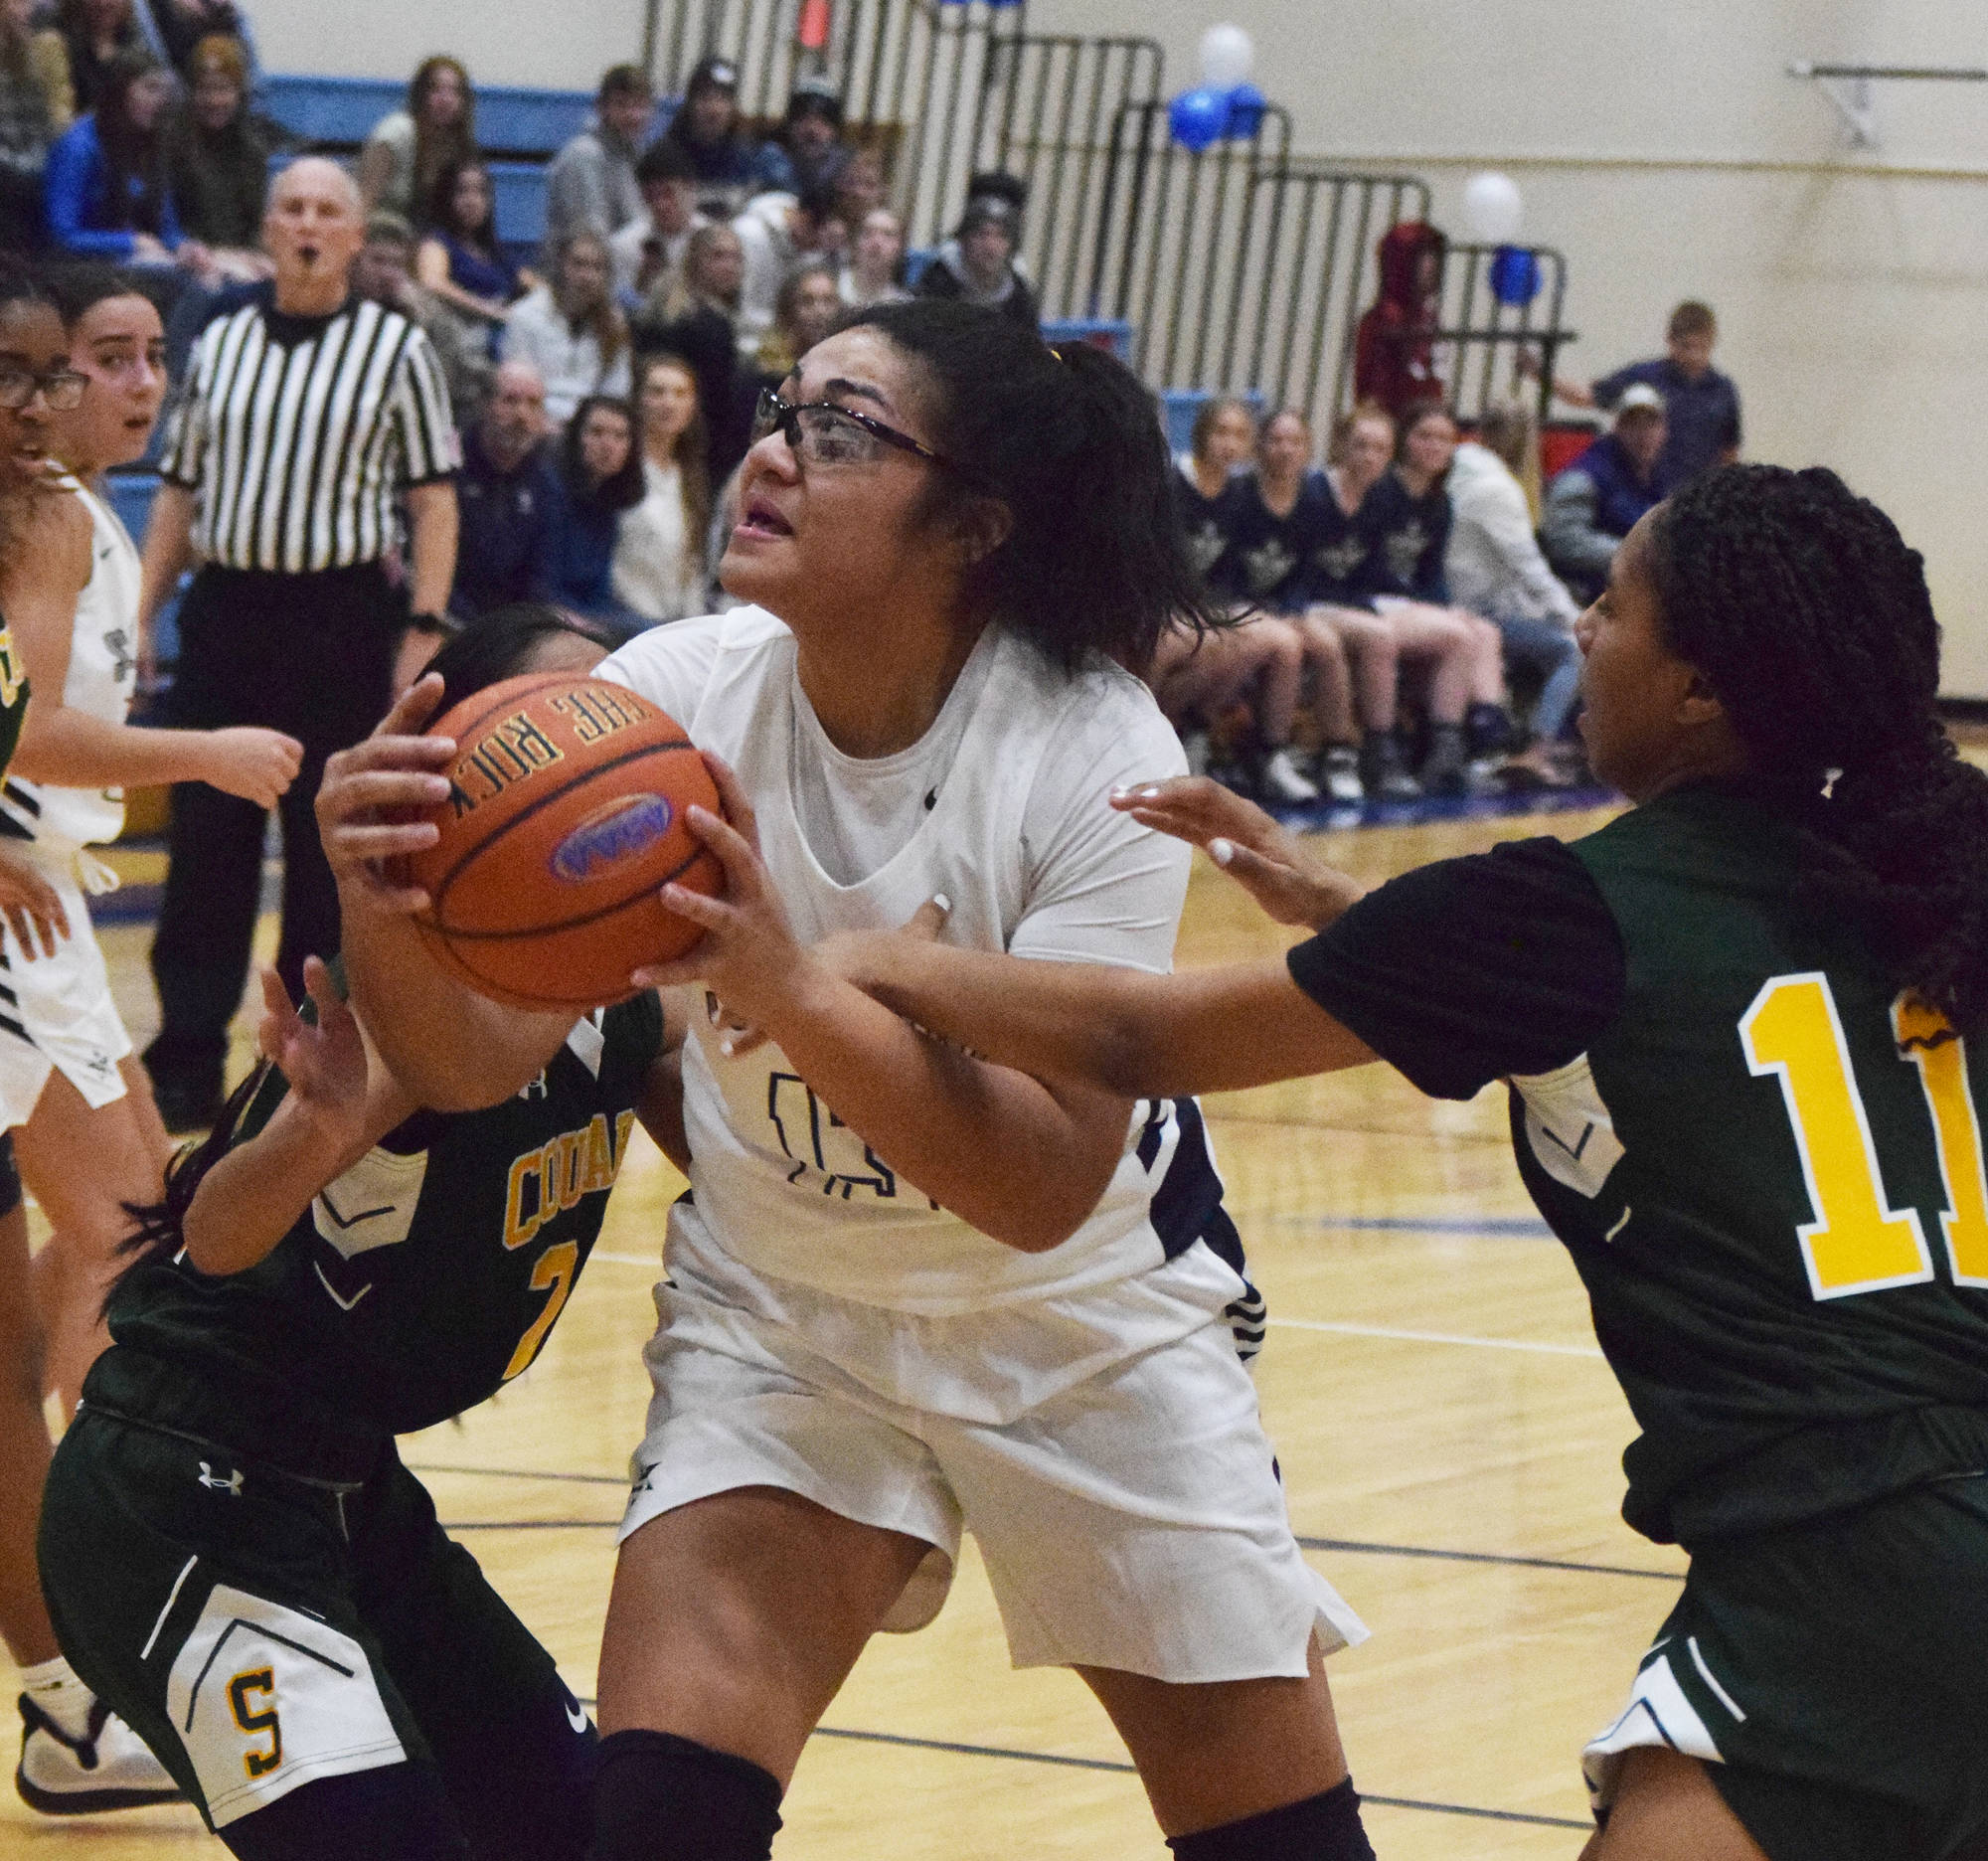 Soldotna’s Ituau Tuisaula powers through the Service defense for a layup Friday, Dec. 20, 2019, at the Powerade/Al Howard Tip-Off tournament at Soldotna High School. (Photo by Joey Klecka/Peninsula Clarion)